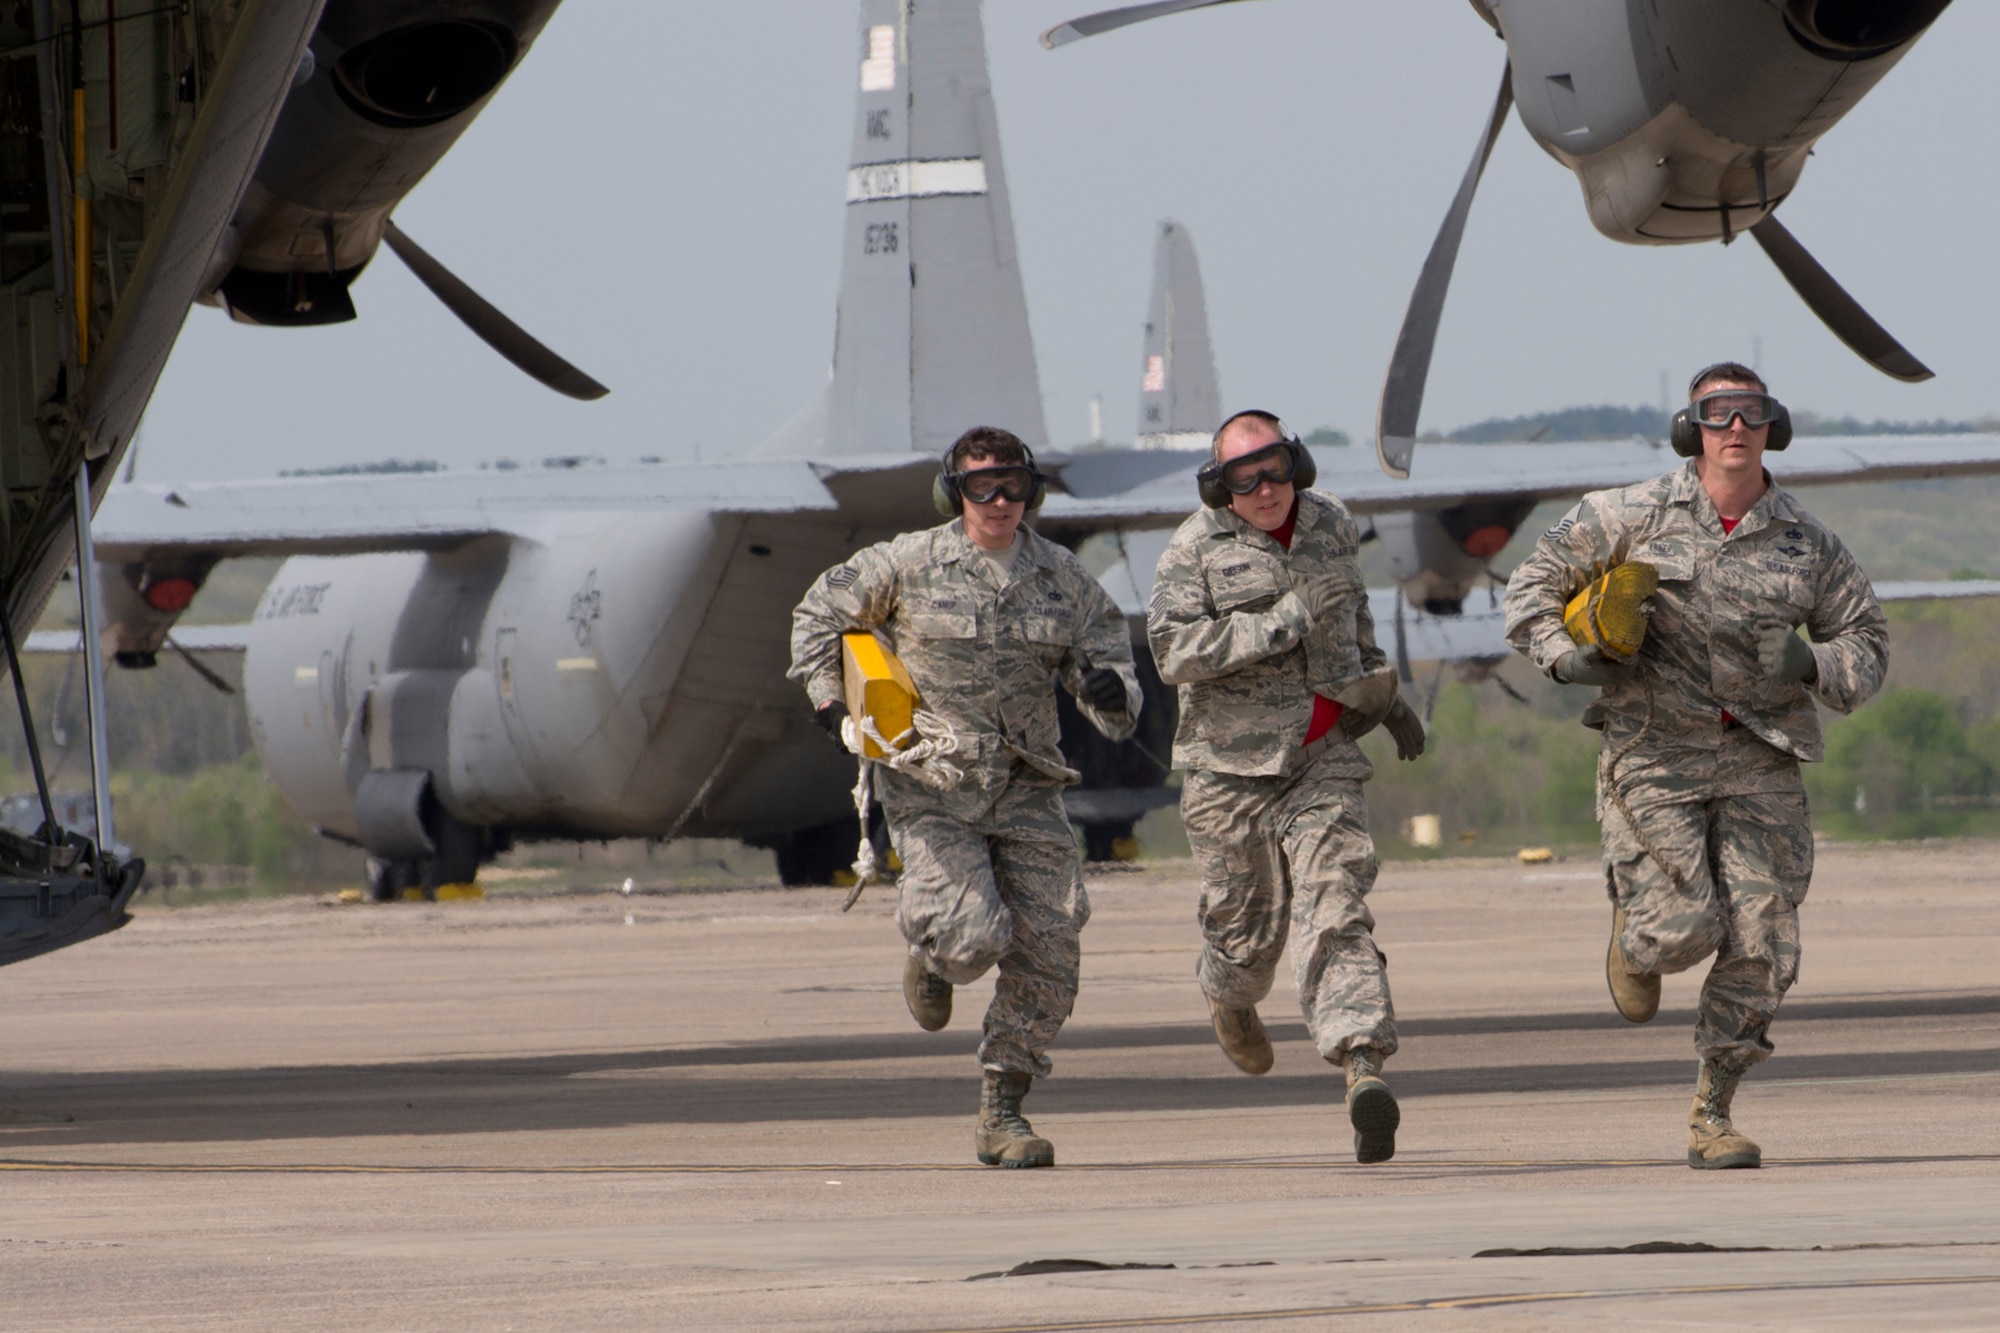 (Left to Right) U.S. Air Force Reserve Tech Sgt. Danny Canup, Tech Sgt. Jason Gibson and Master Sgt. Morgan Abner scramble for the finish line to stop the clock, after unloading a C-130J Super Hercules April 2, 2017, at Little Rock Air Force Base, Ark. The Airmen, are assigned to the 96th Aerial Port Squadron, were practicing for the 2017 Port Dawg Challenge to be held at Dobbins Air Reserve Base, Ga. (U.S. Air Force photo by Master Sgt. Jeff Walston/Released)